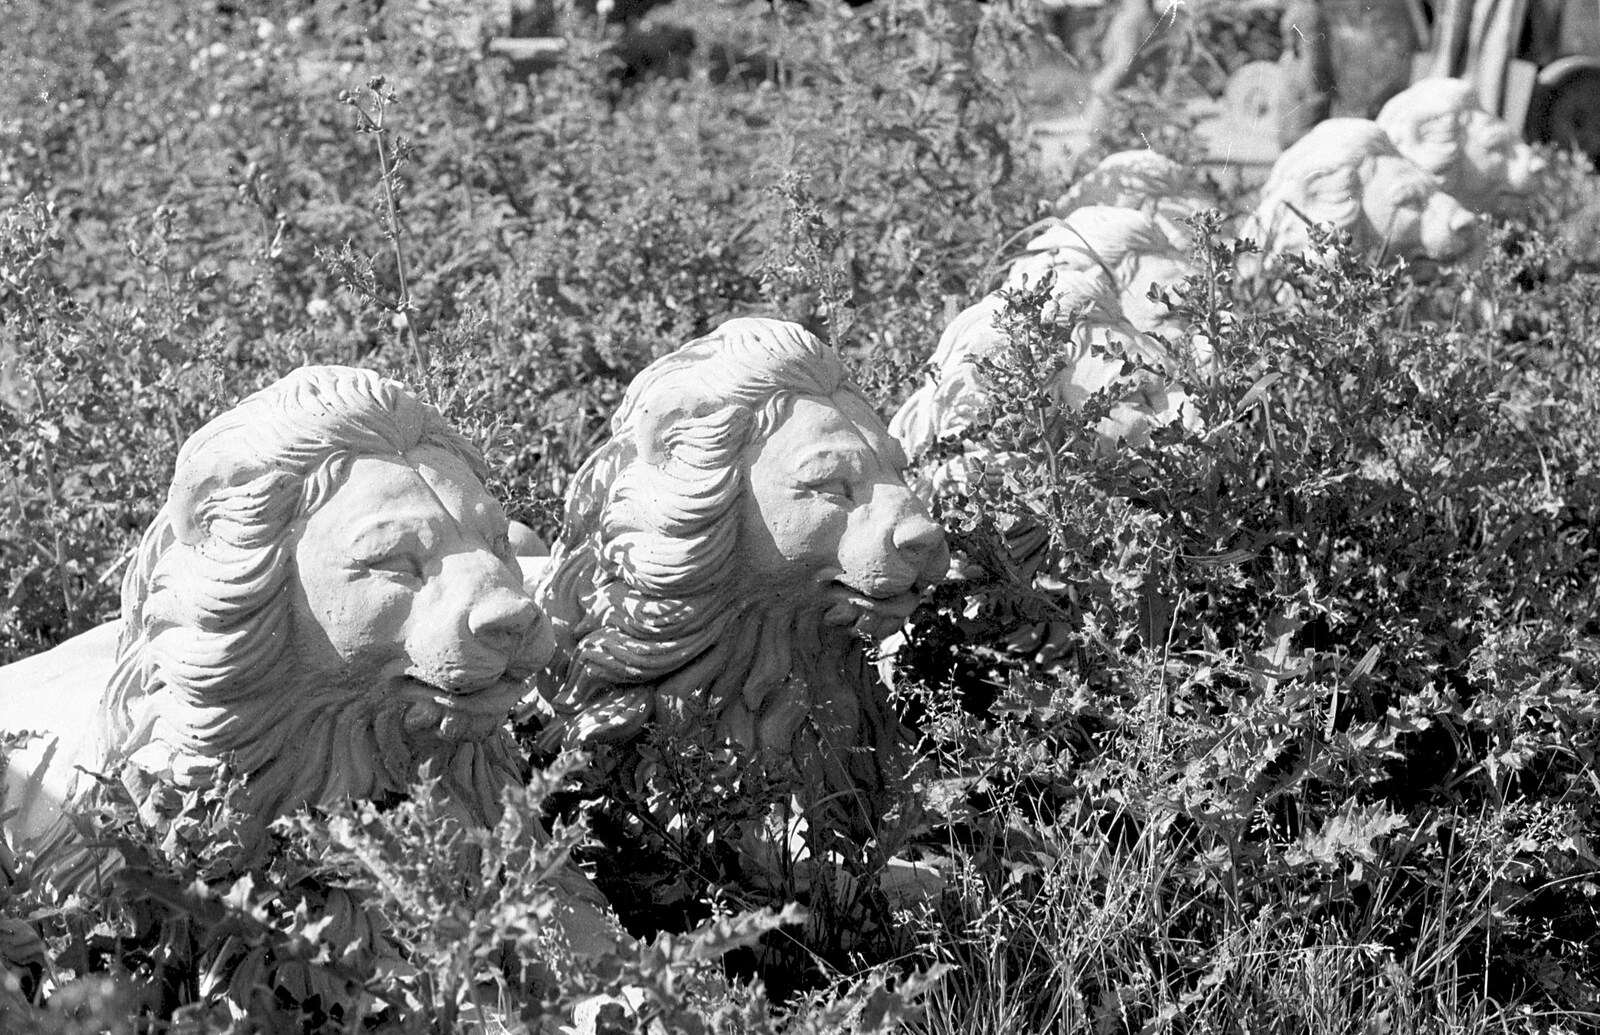 Some lions in the undergrowth from A Black and White Life in Concrete, Stuston, Suffolk - 3rd September 1992